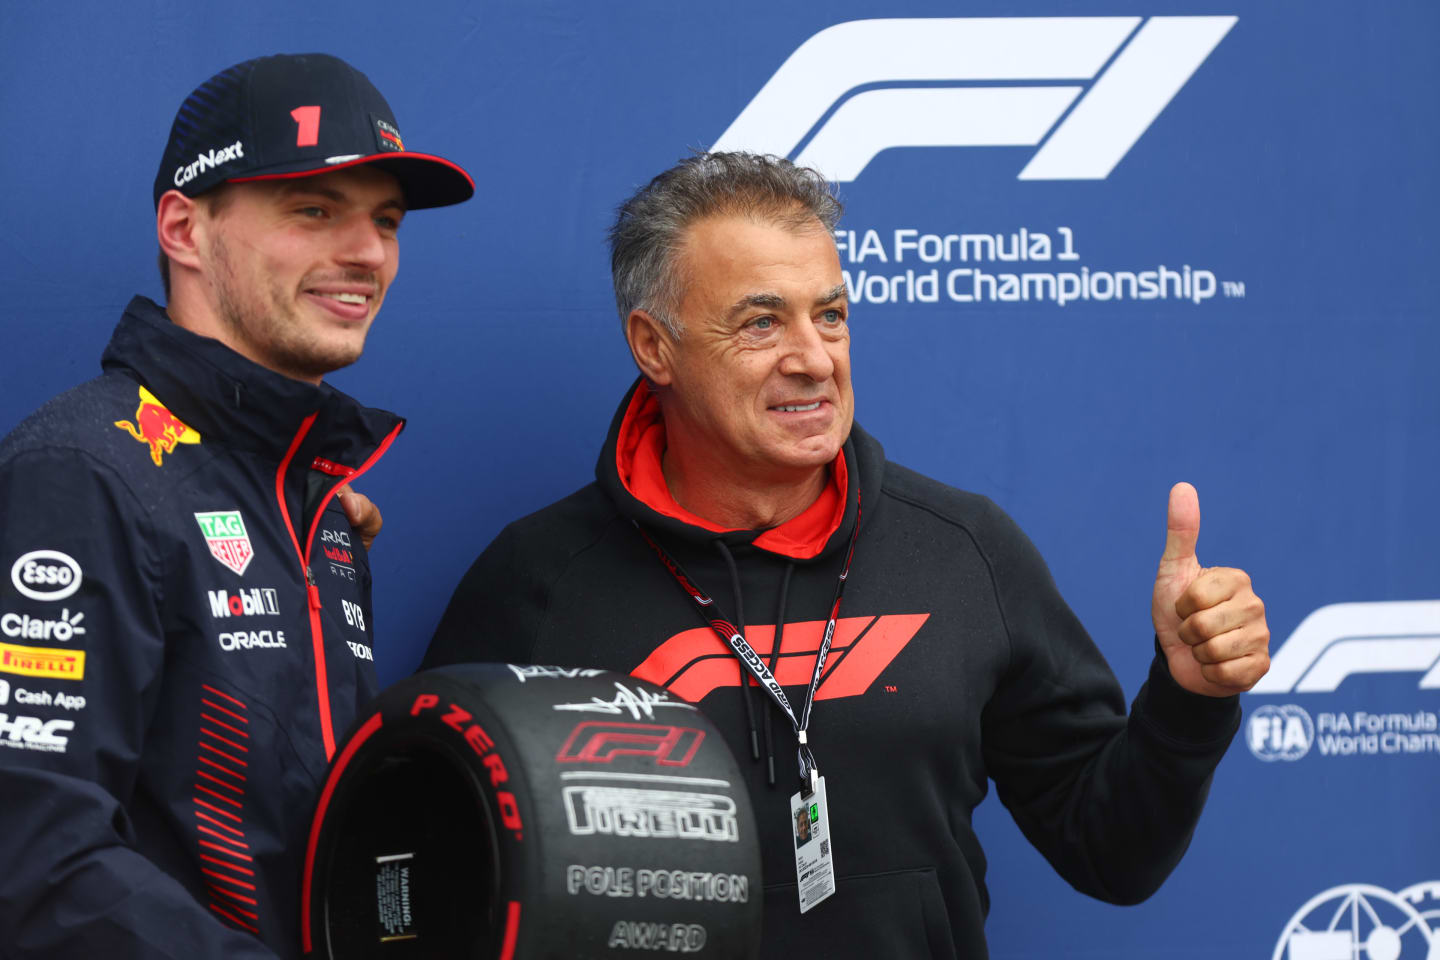 MONTREAL, QUEBEC - JUNE 17: Pole position qualifier Max Verstappen of the Netherlands and Oracle Red Bull Racing is presented with the Pirelli Pole Position award by Jean Alesi in parc ferme during qualifying ahead of the F1 Grand Prix of Canada at Circuit Gilles Villeneuve on June 17, 2023 in Montreal, Quebec. (Photo by Dan Istitene - Formula 1/Formula 1 via Getty Images)